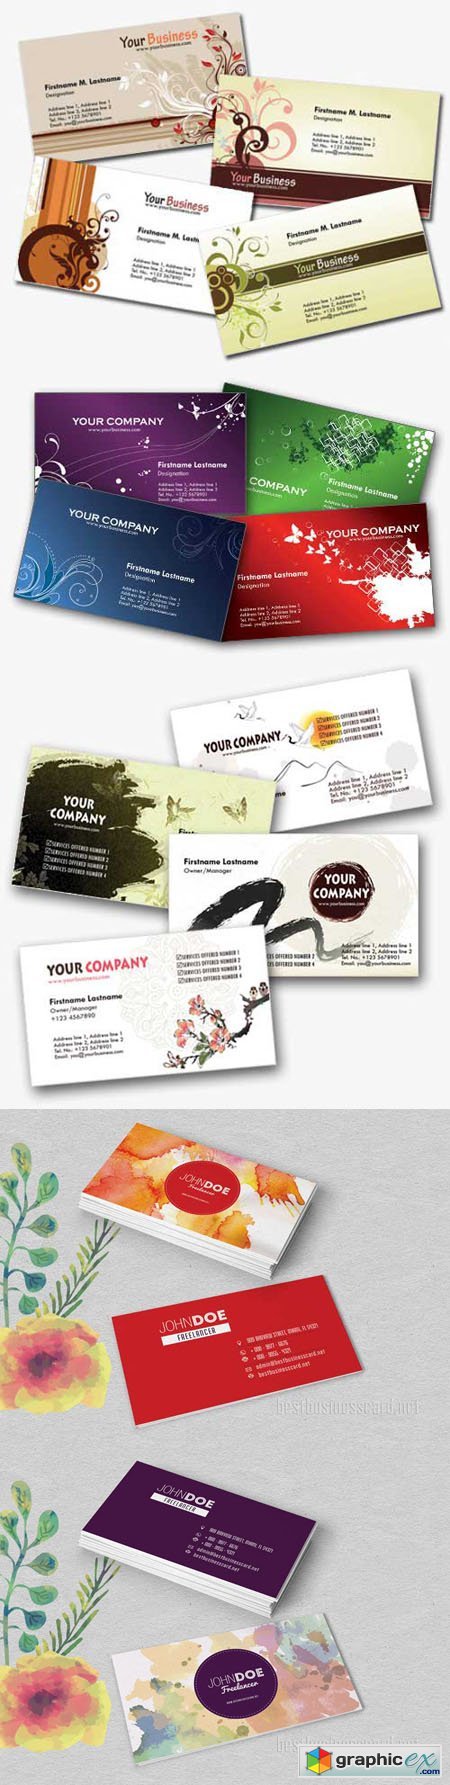 12 Colorful Personal Business Card Templates